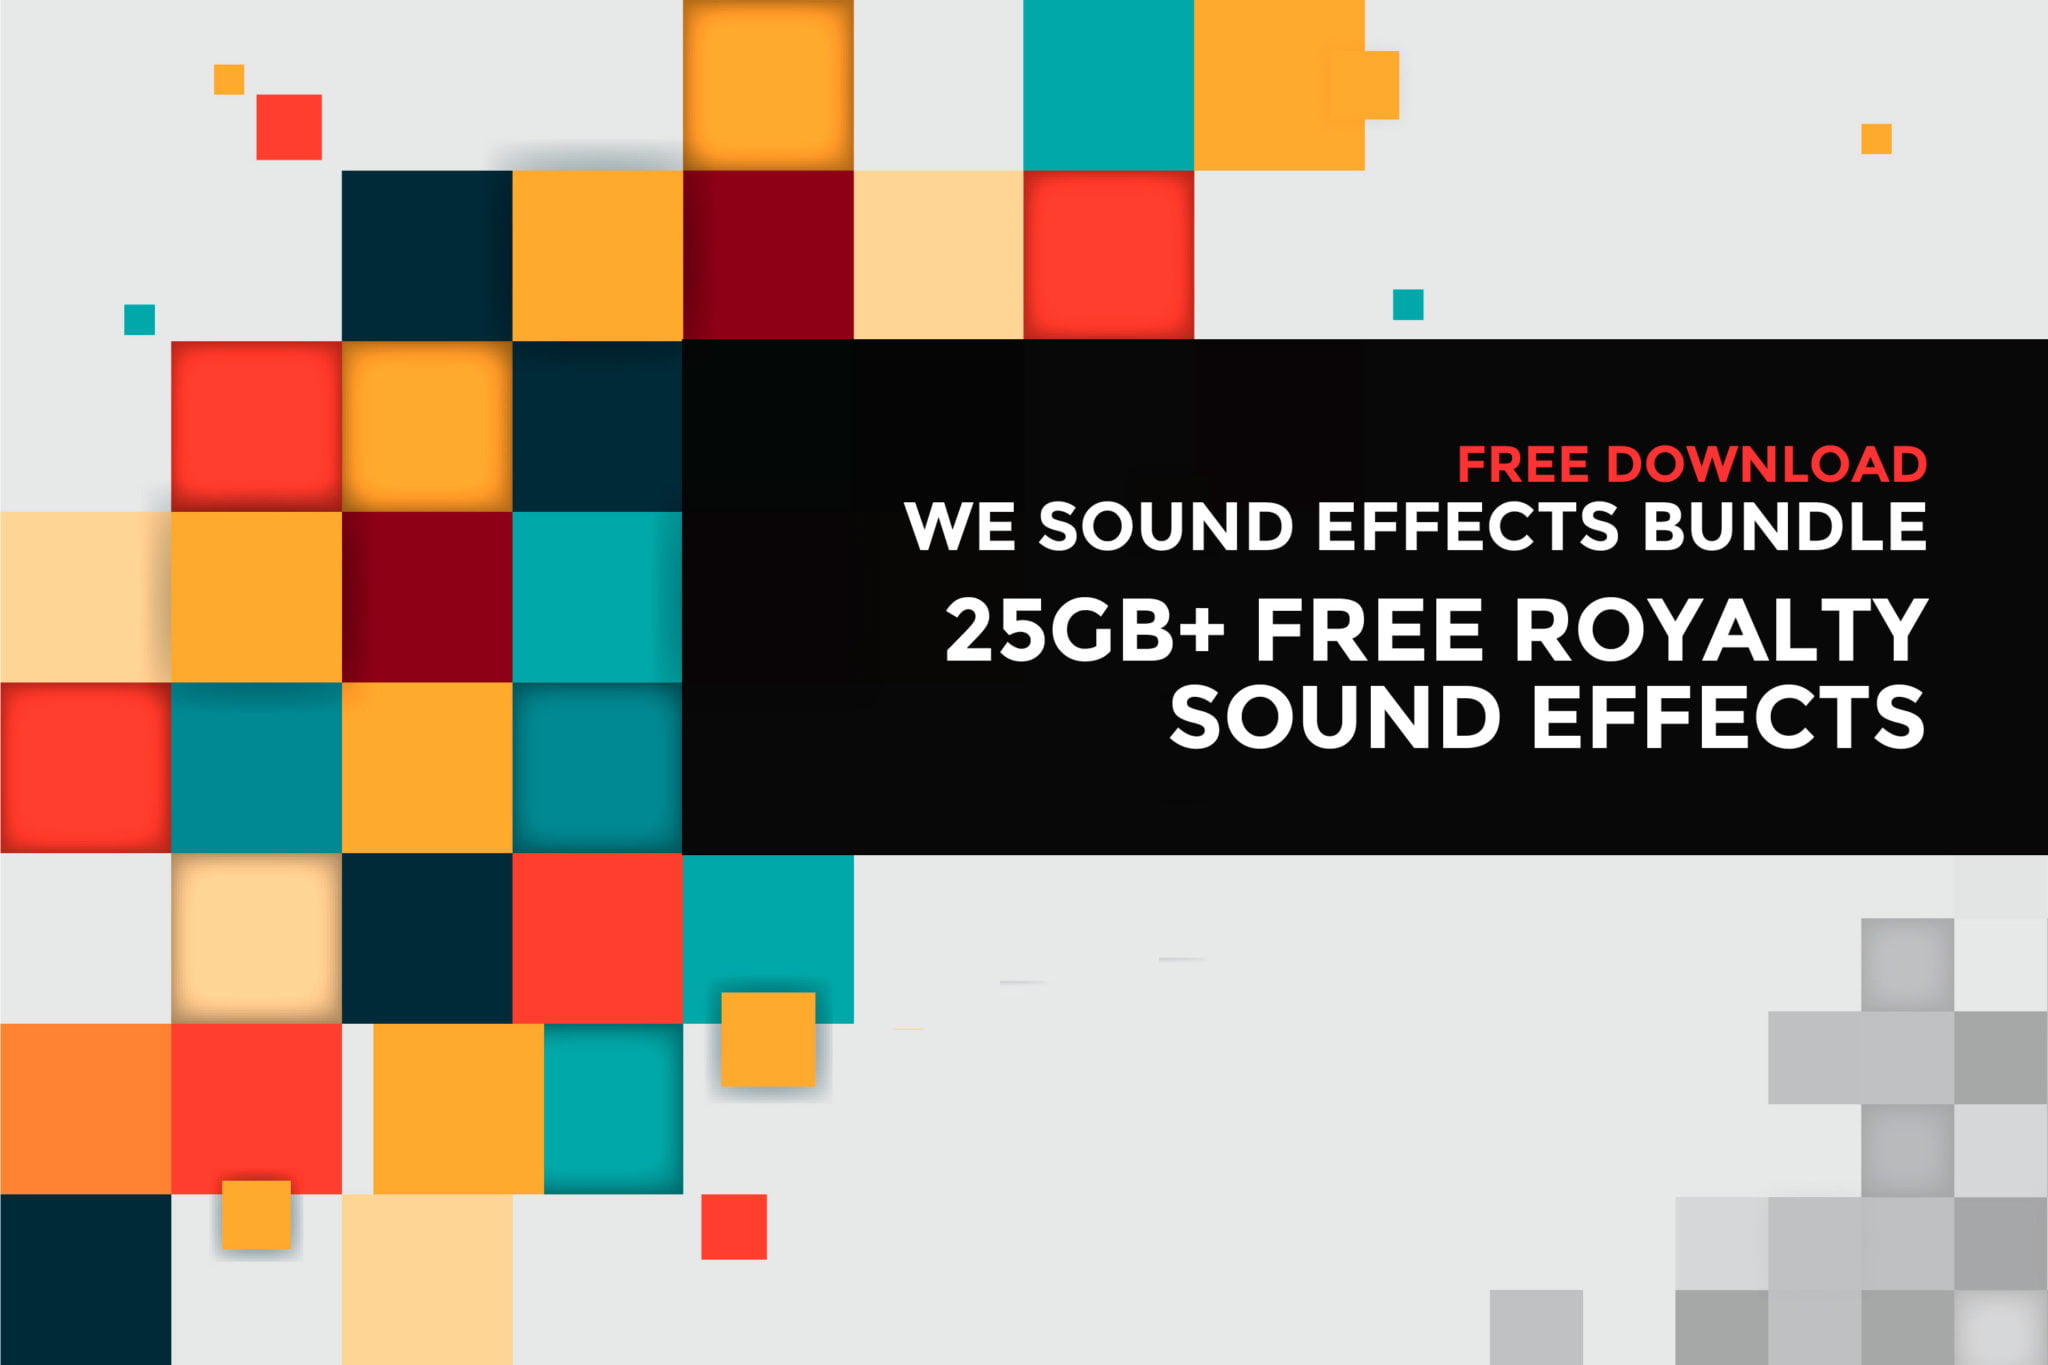 We Sound Effects launches free 25GB+ SFX library